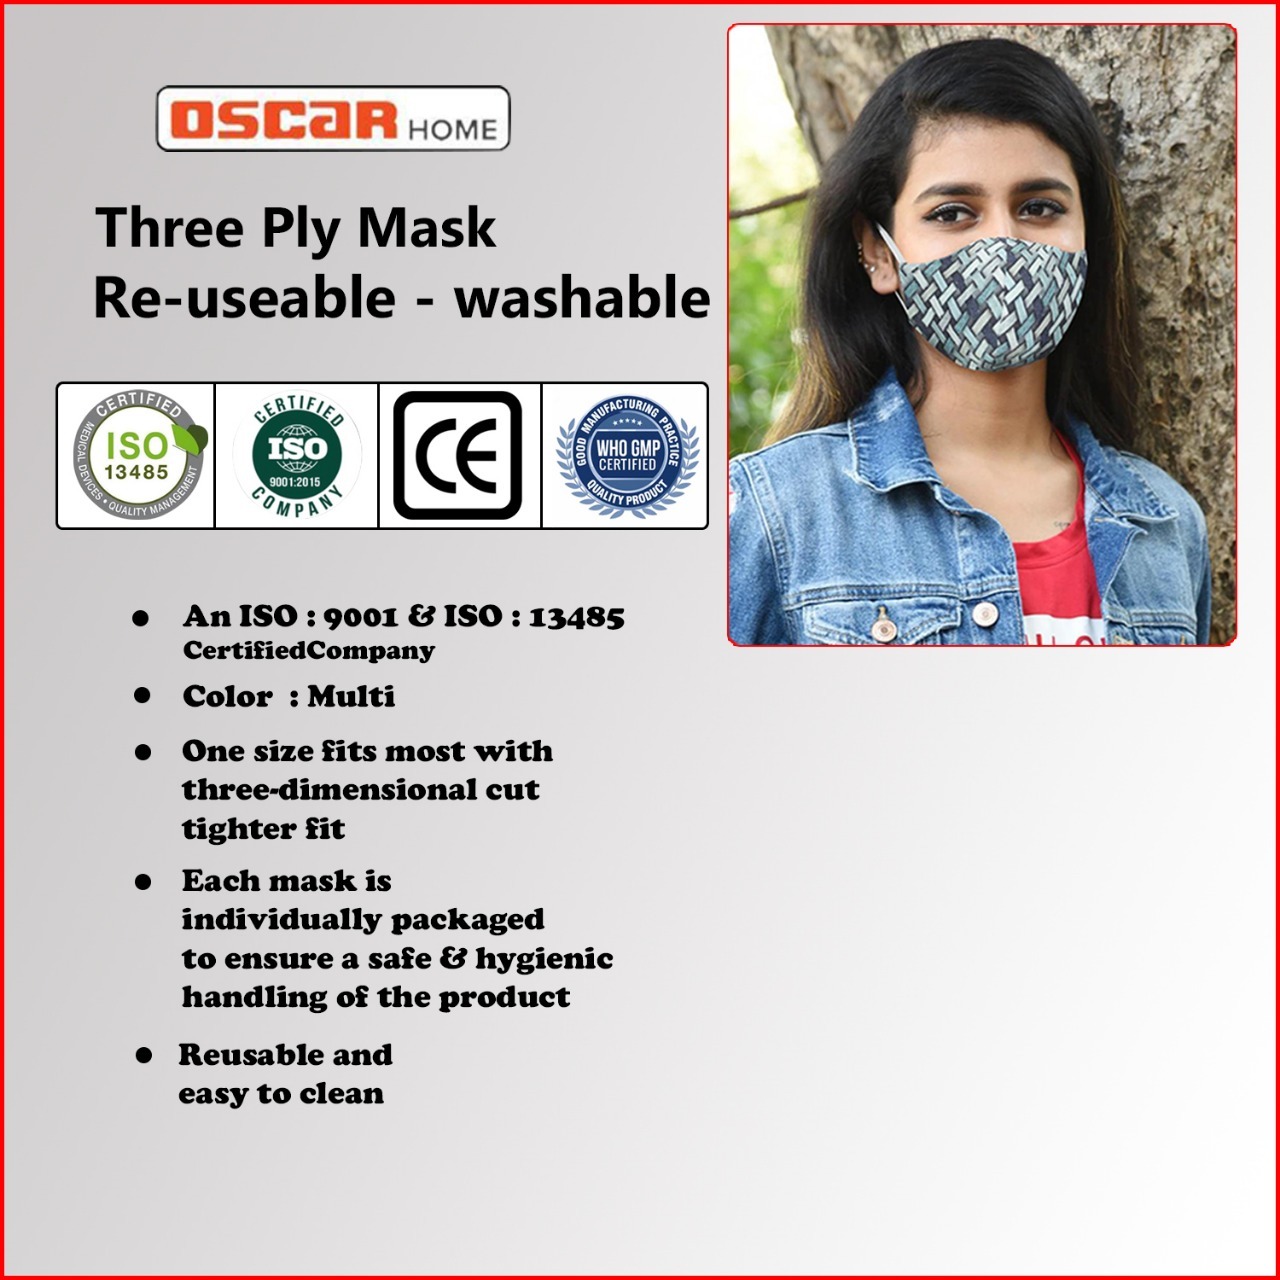 Printed & Reusable Face mask WHO/CE Certified